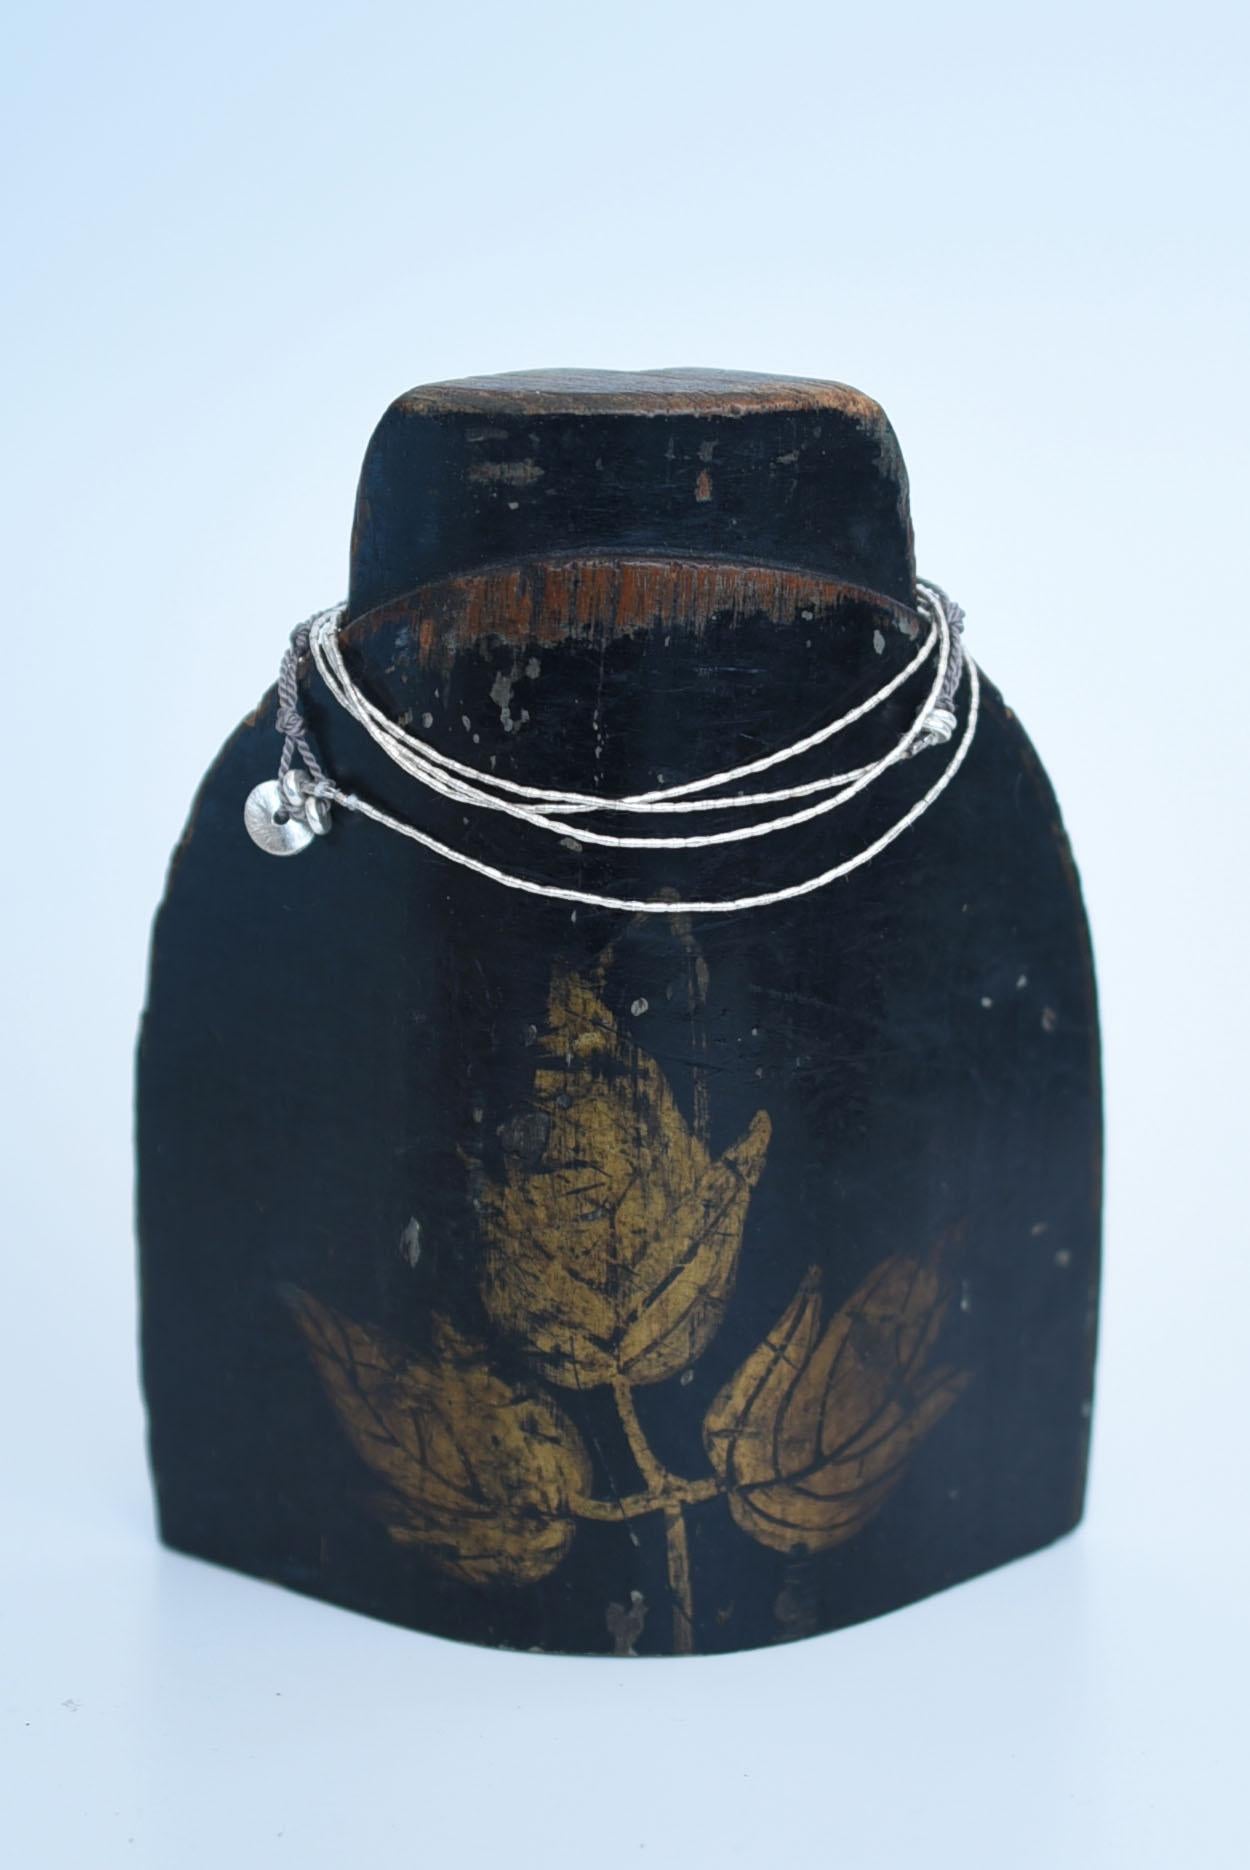 material:karen silver,silk cord
size :length 79cm / weight 3g

The delicate Karen silver chain and silk cord material allow the necklace to be worn in any number of ways. Karen silver, made by the Karen ethnic minority people of Thailand and